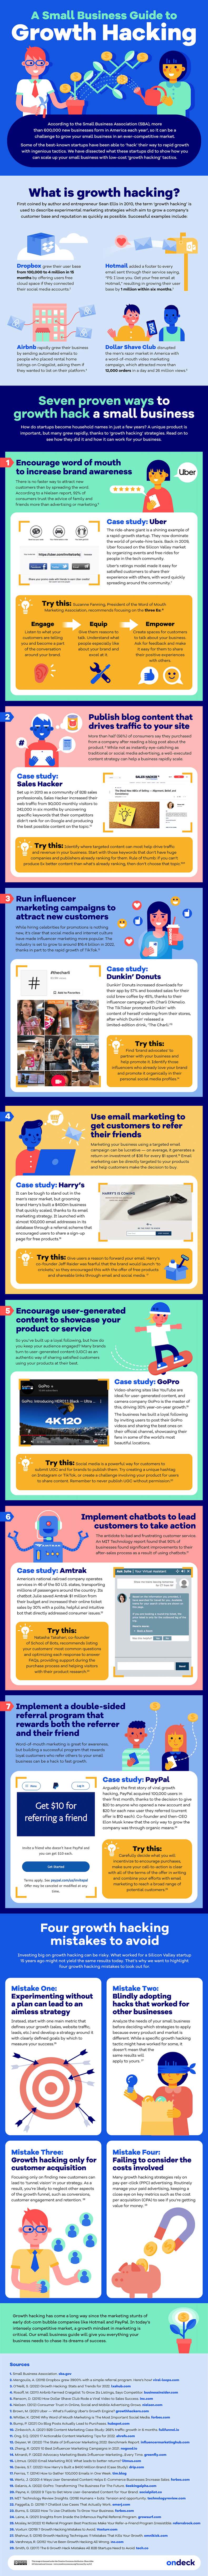 A small business guide to growth hacking infographic